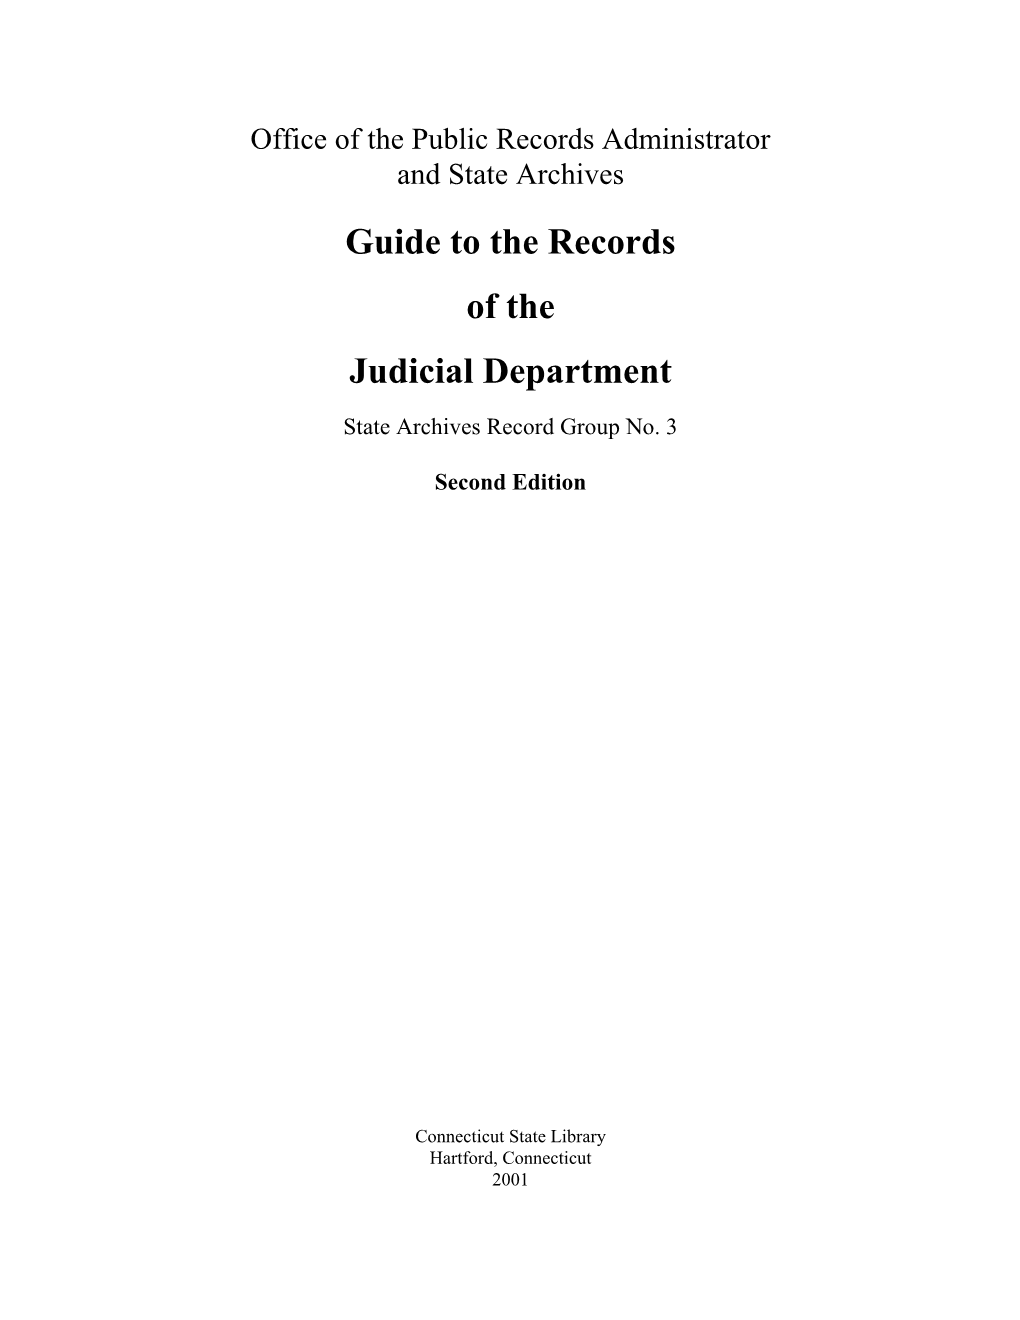 Guide to the Records of the Judicial Department